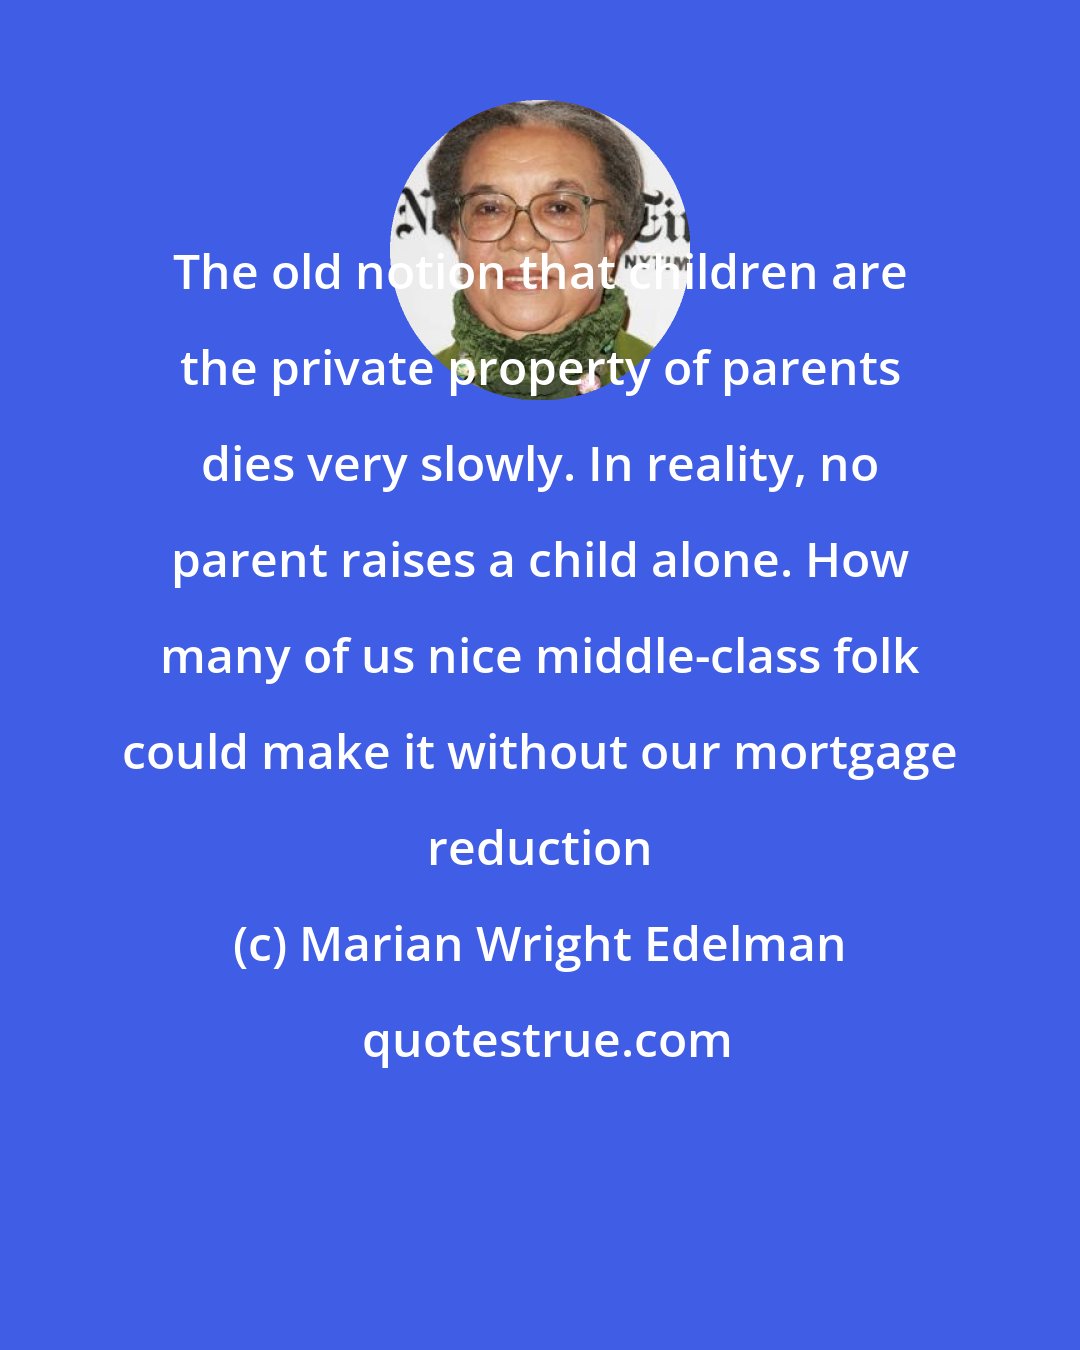 Marian Wright Edelman: The old notion that children are the private property of parents dies very slowly. In reality, no parent raises a child alone. How many of us nice middle-class folk could make it without our mortgage reduction